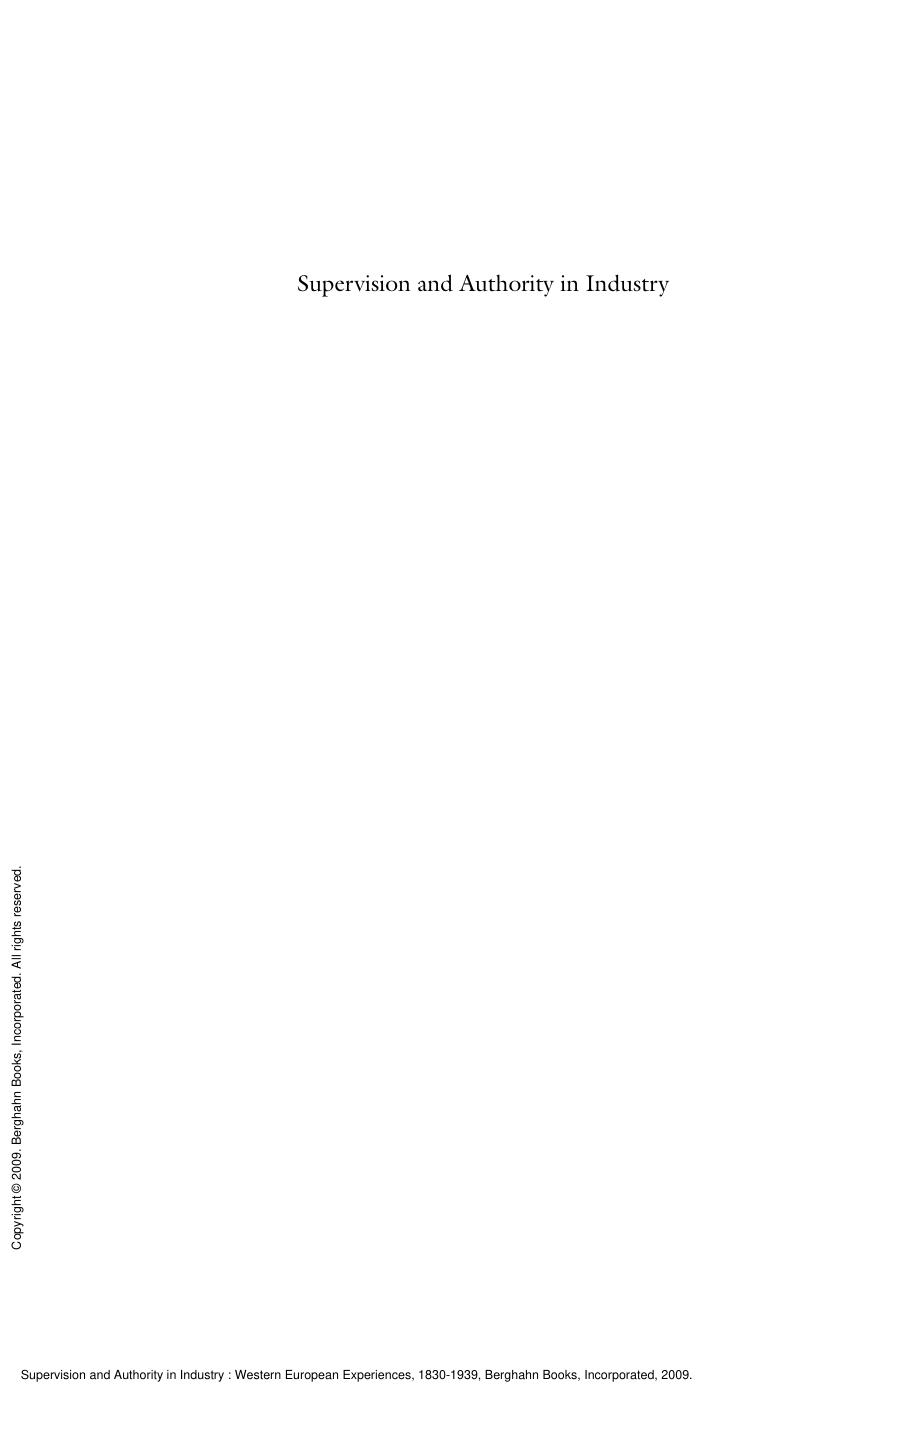 Supervision and Authority in Industry : Western European Experiences, 1830-1939 by Patricia Van Den Eeckhout